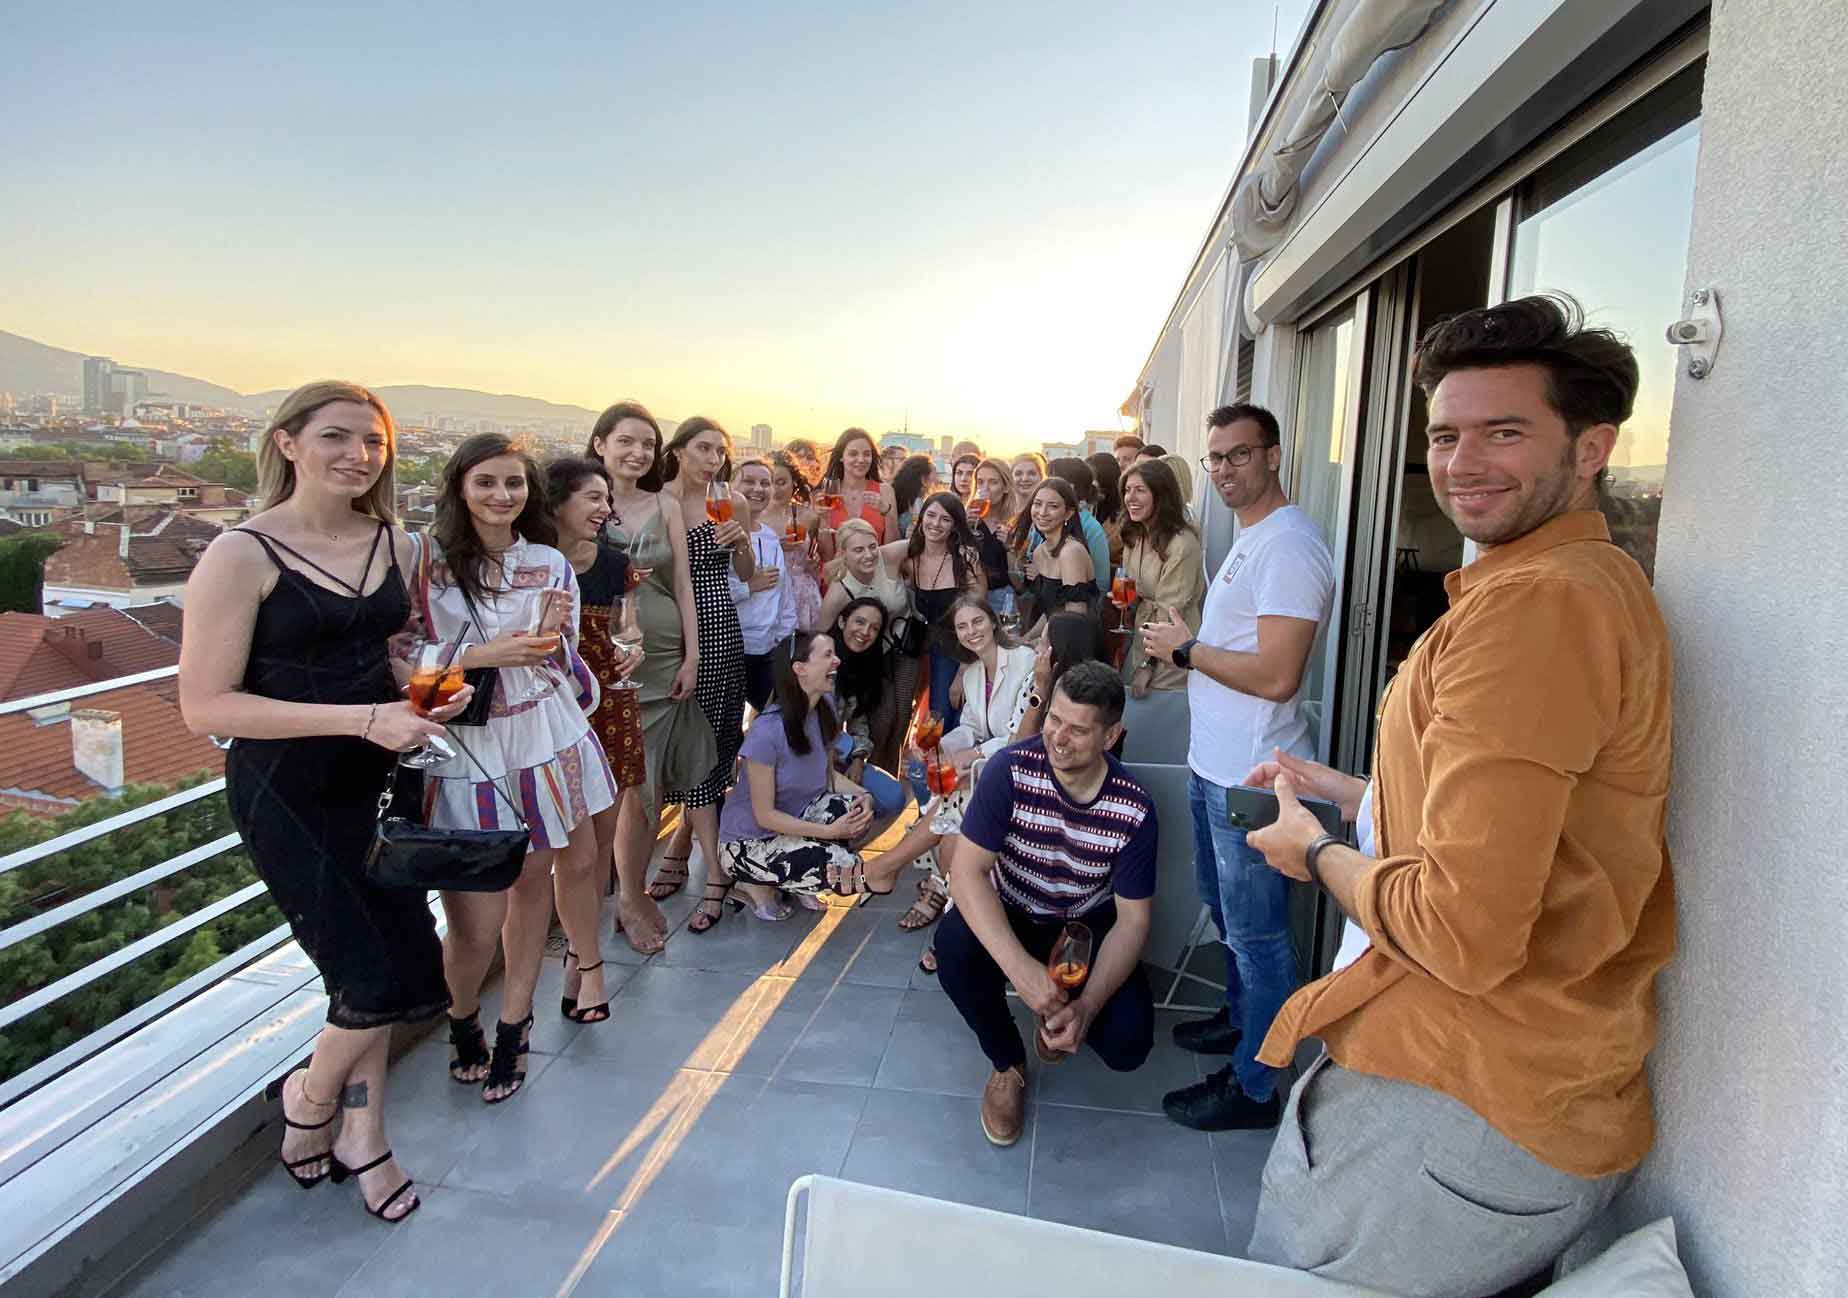 Team Building Event on a roof terrace